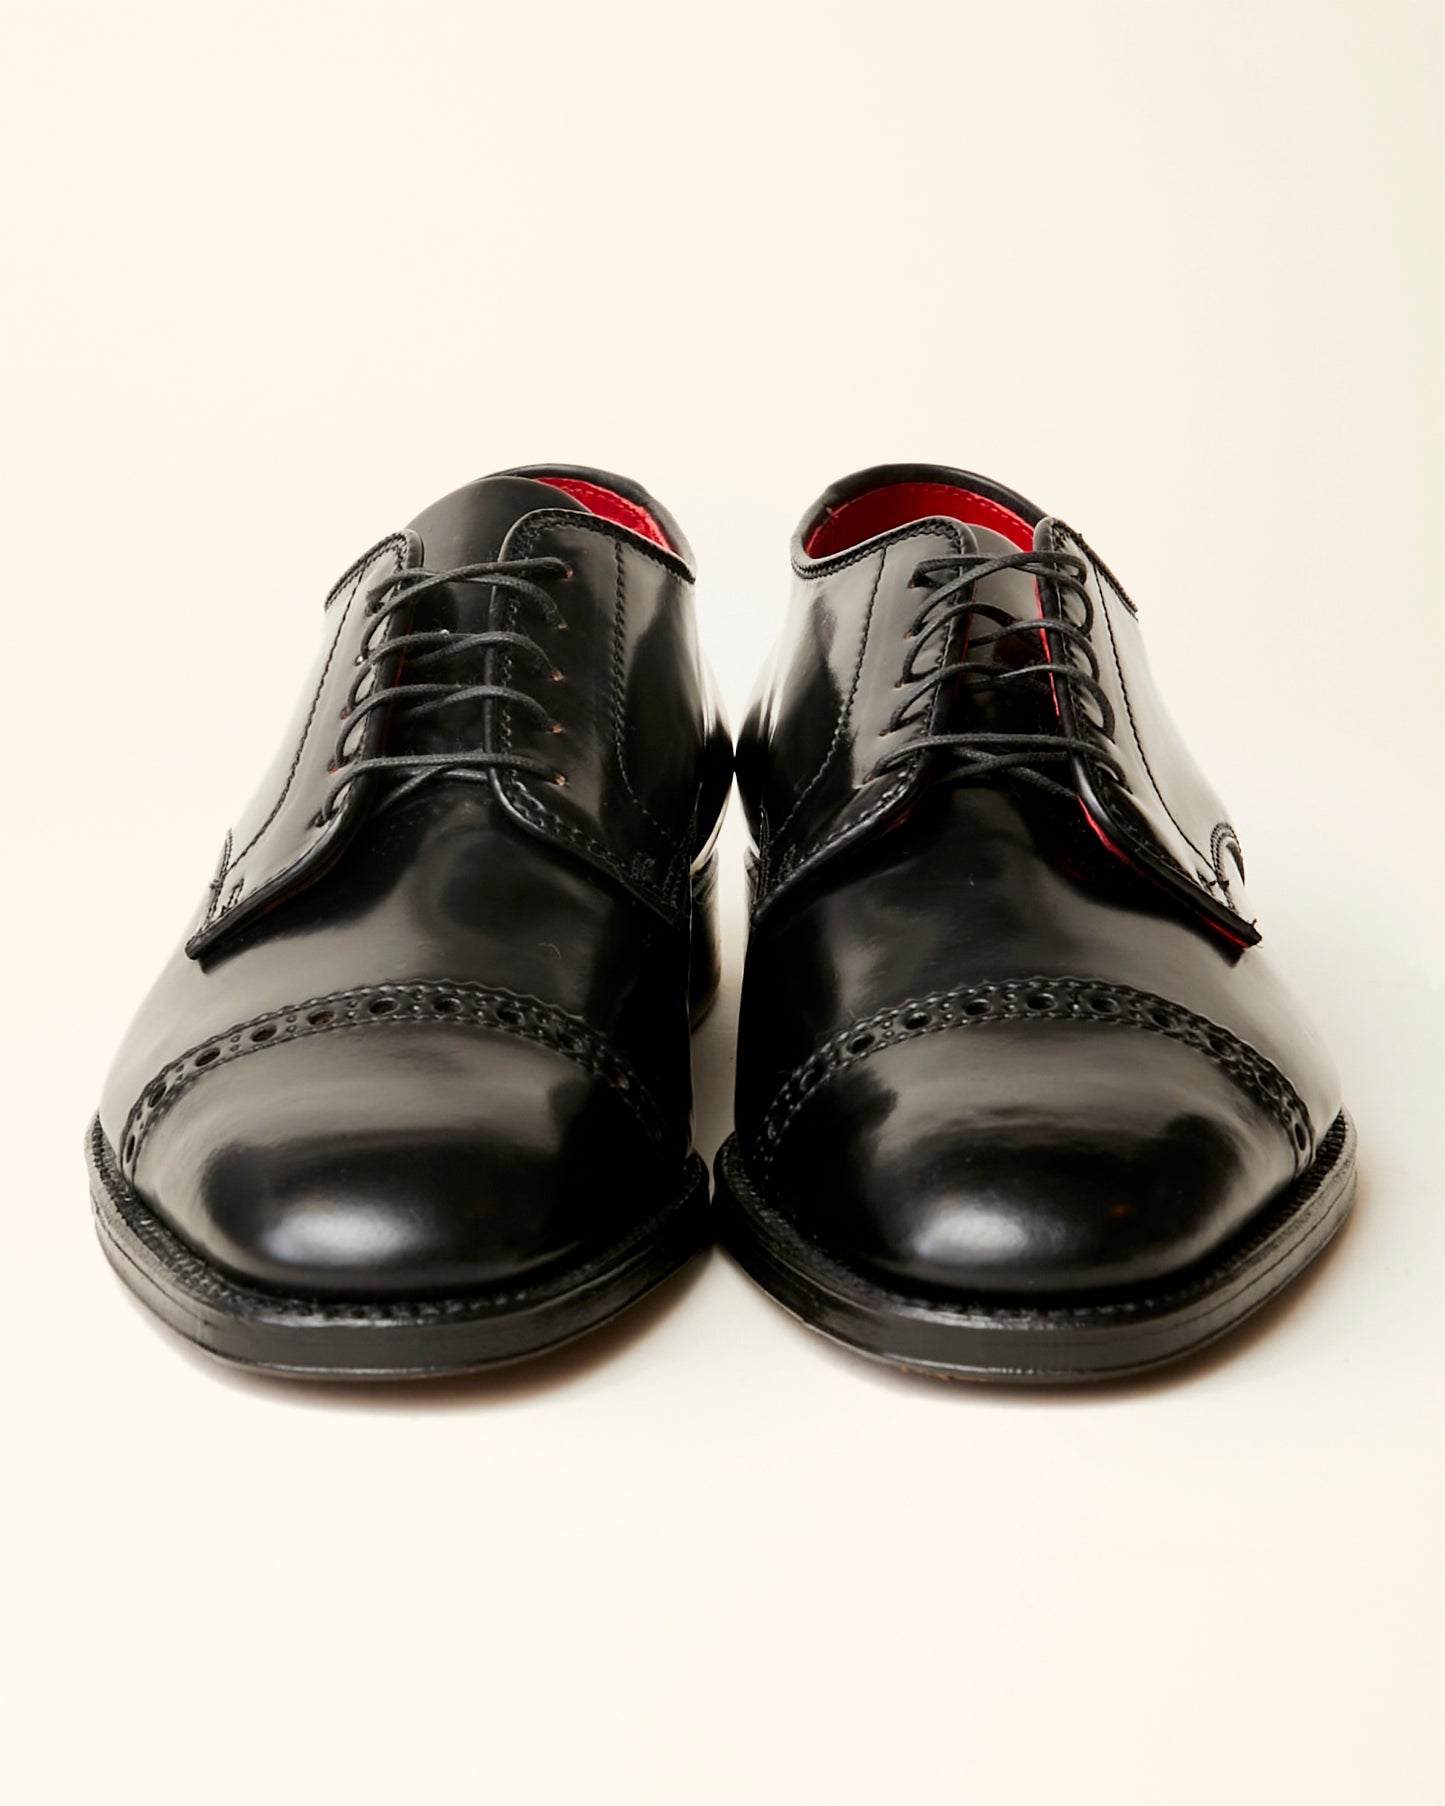 "Executive" Black Shell Cordovan Unlined Perforated Straight Tip Blucher